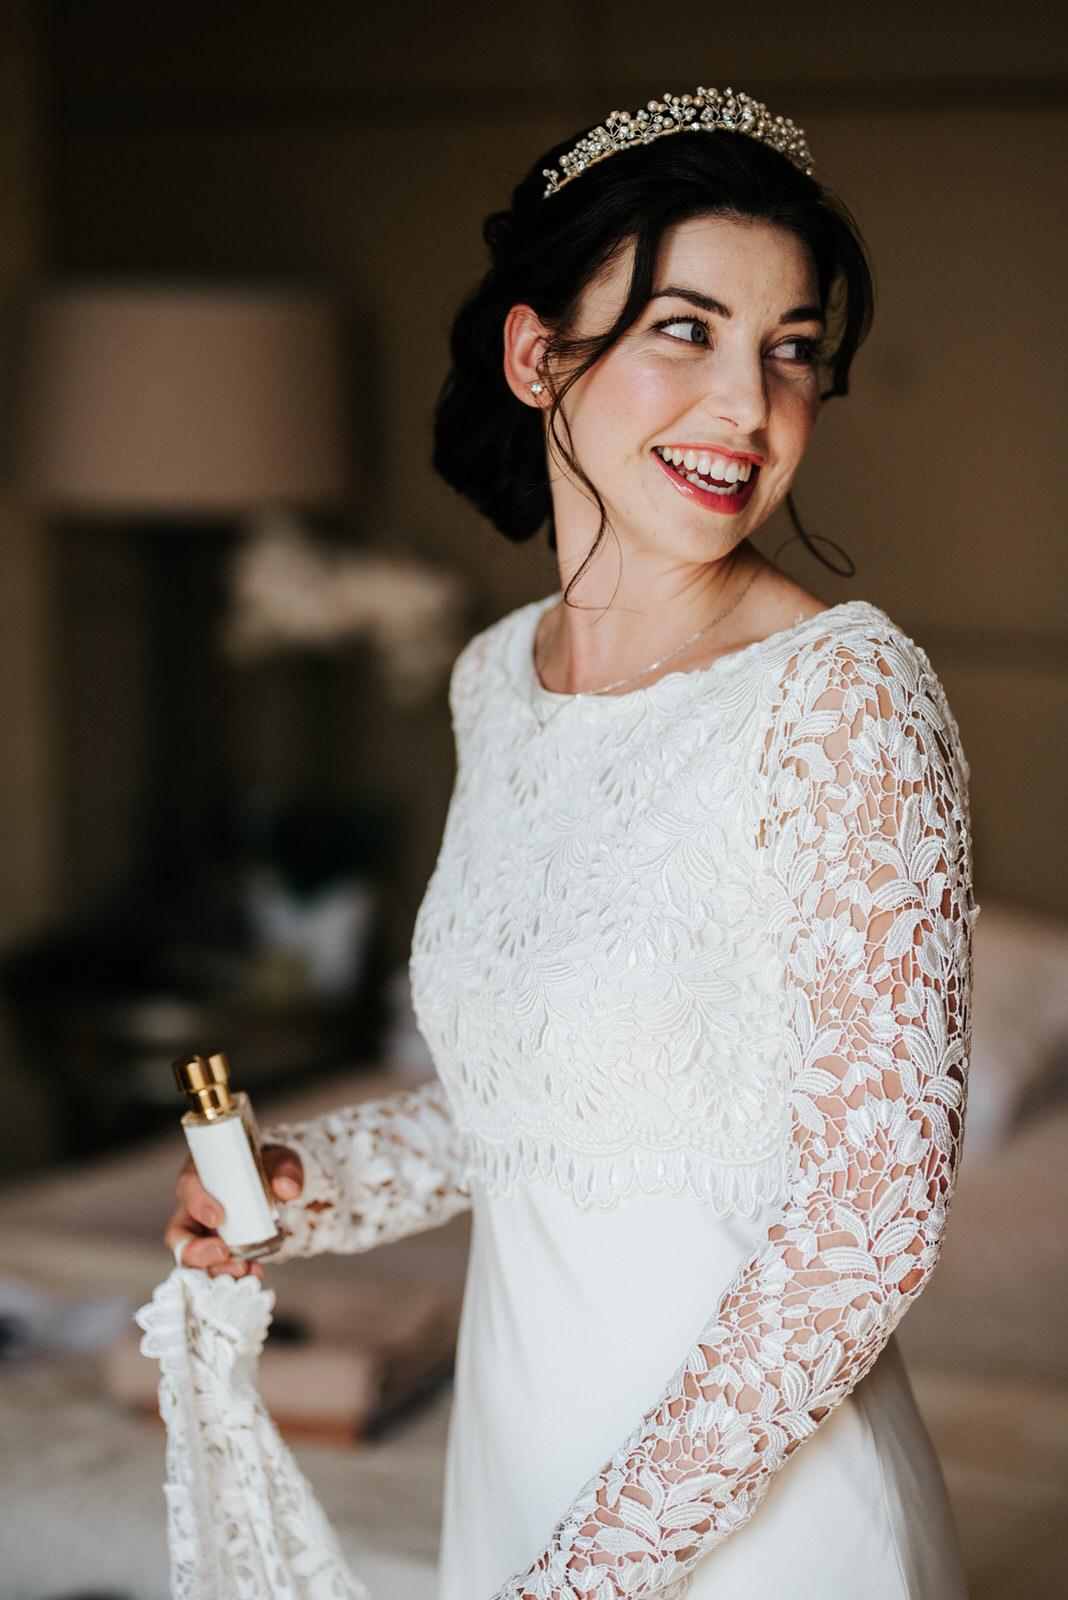  Bride turns and looks at herself in the mirror as she holds a small bottle of perfume 